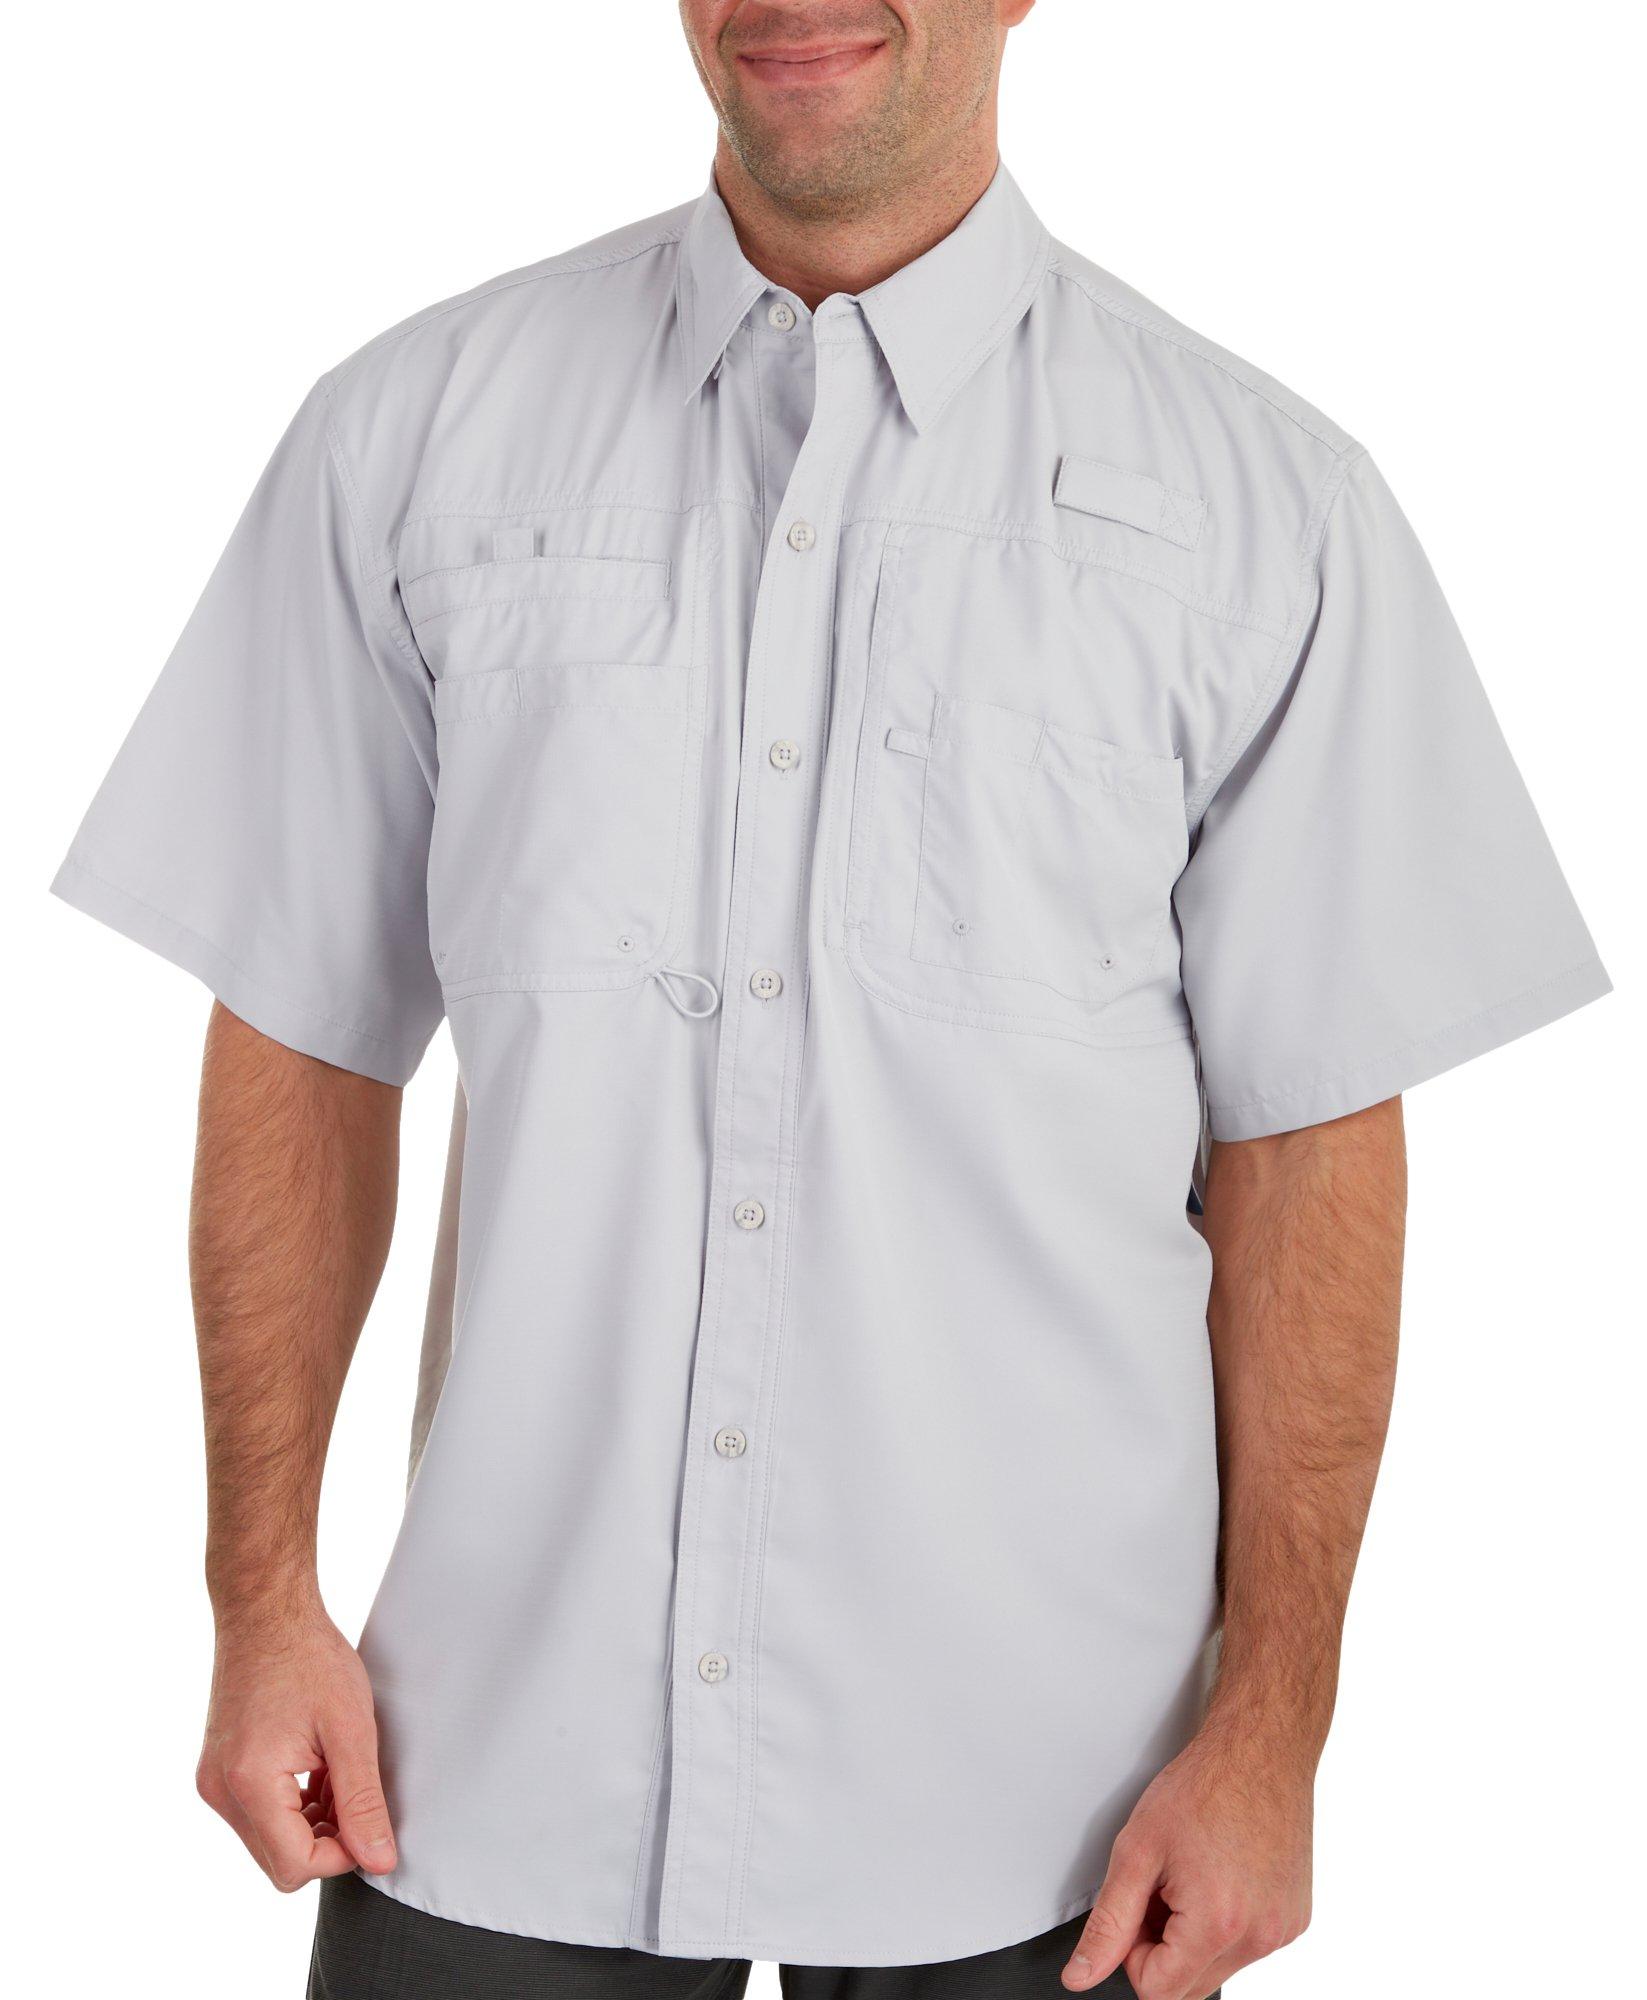 Reel Legends Mens Solid Saltwater II Short Sleeve Shirt - White - Small